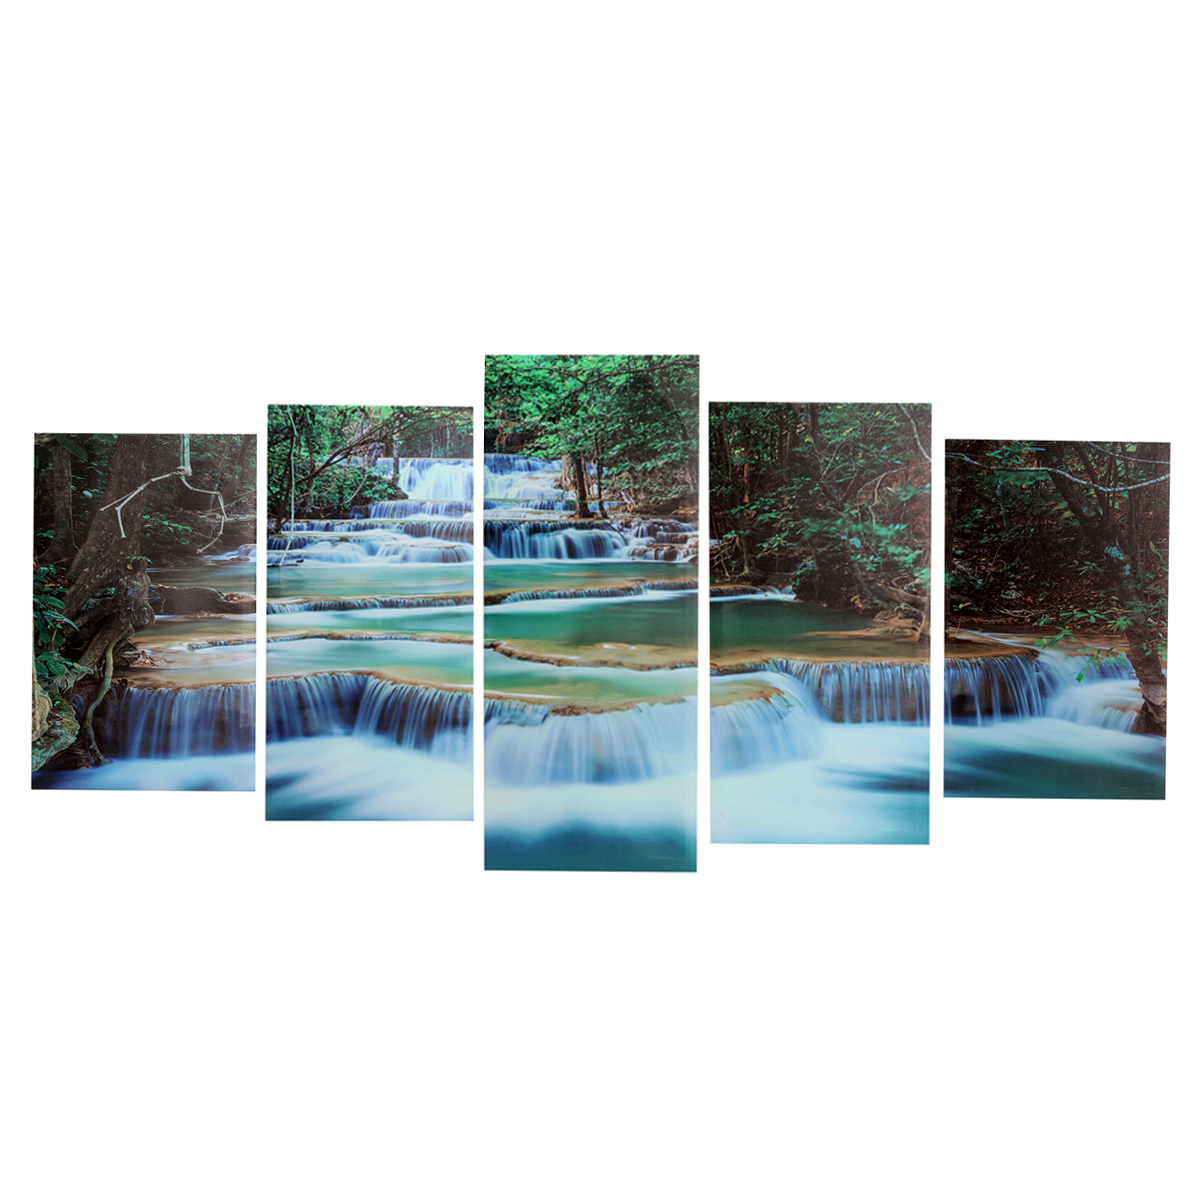 Large-Framed-Canvas-Prints-Forest-Waterfall-Painting-Home-Hanging-Wall-Decorations-1444004-1